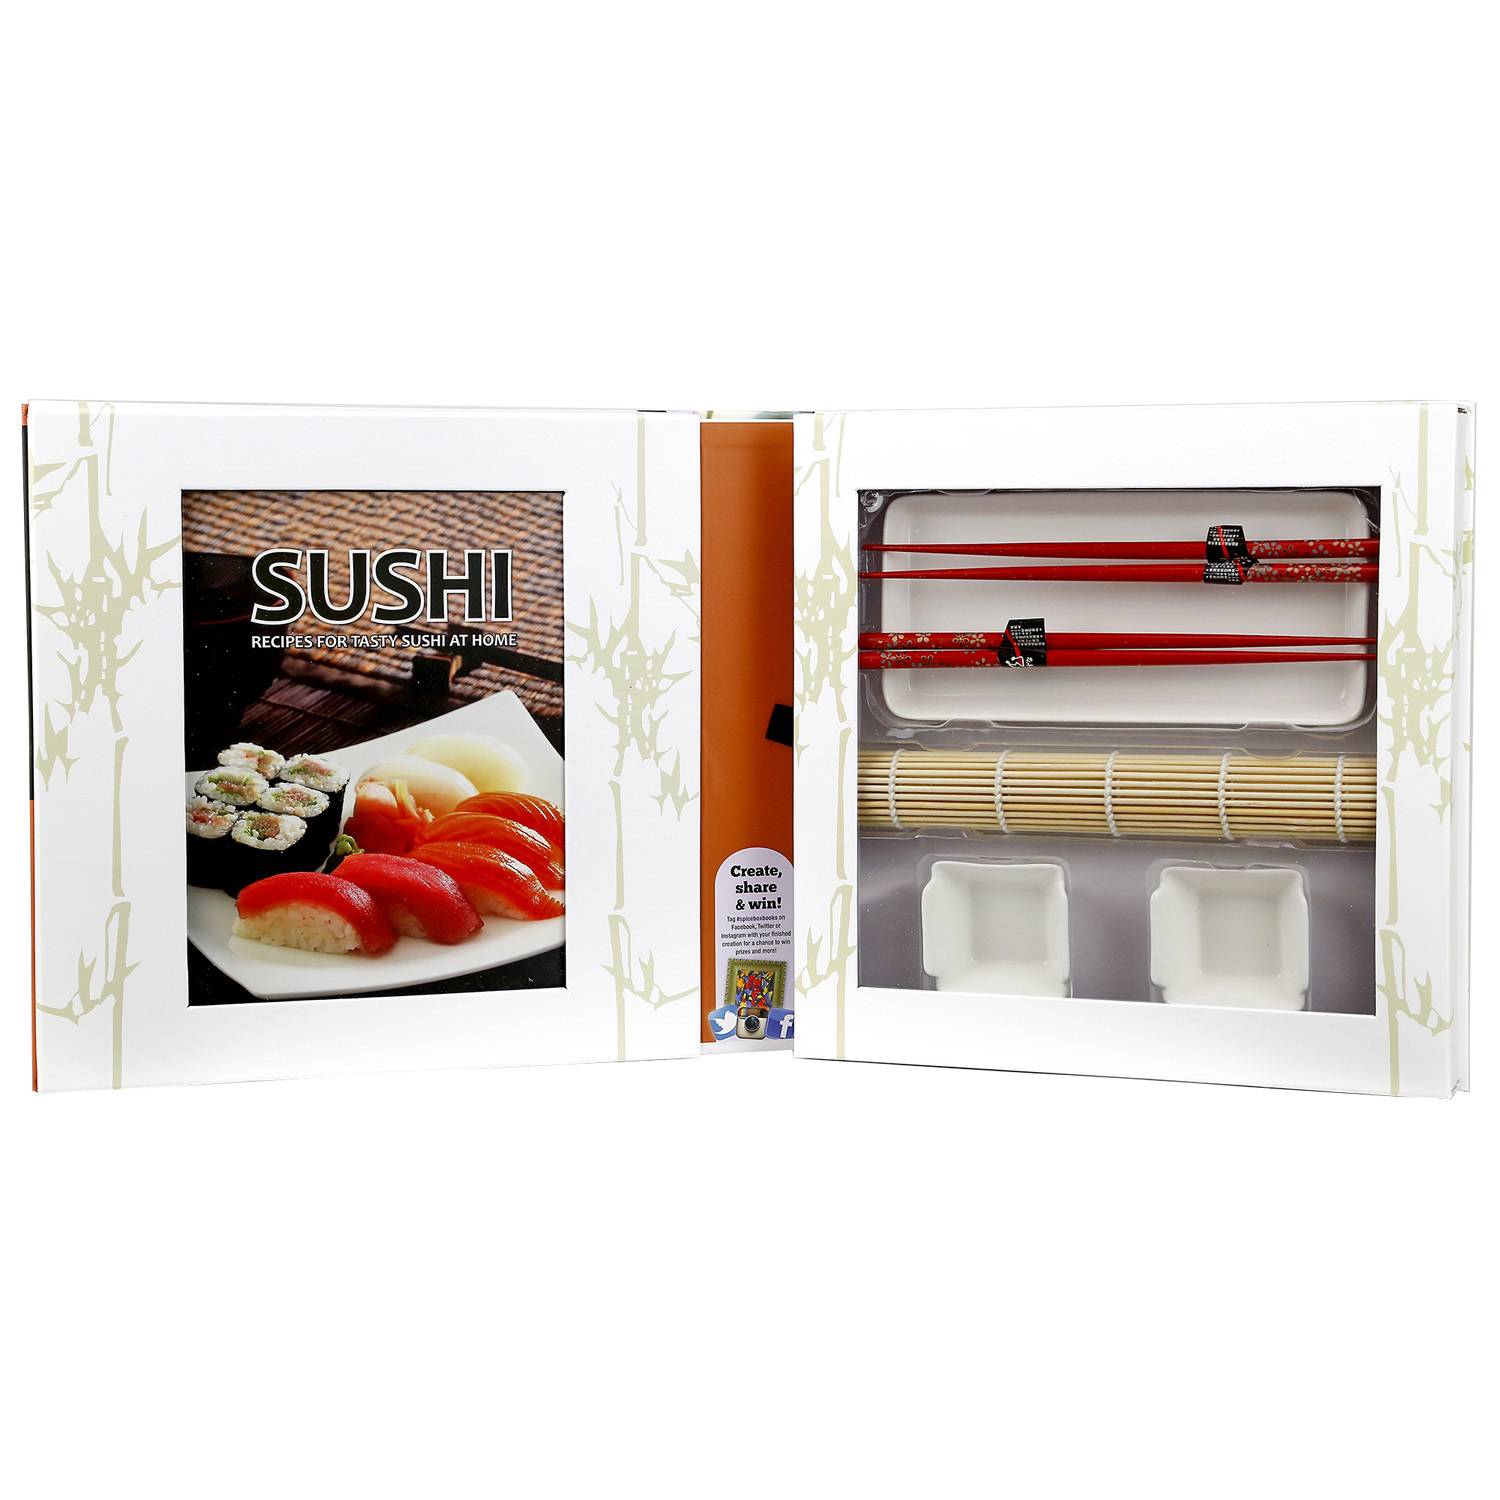 A beginners guide to sushi: Part 2 (Reading the ingredients) - Manners &  Mischief